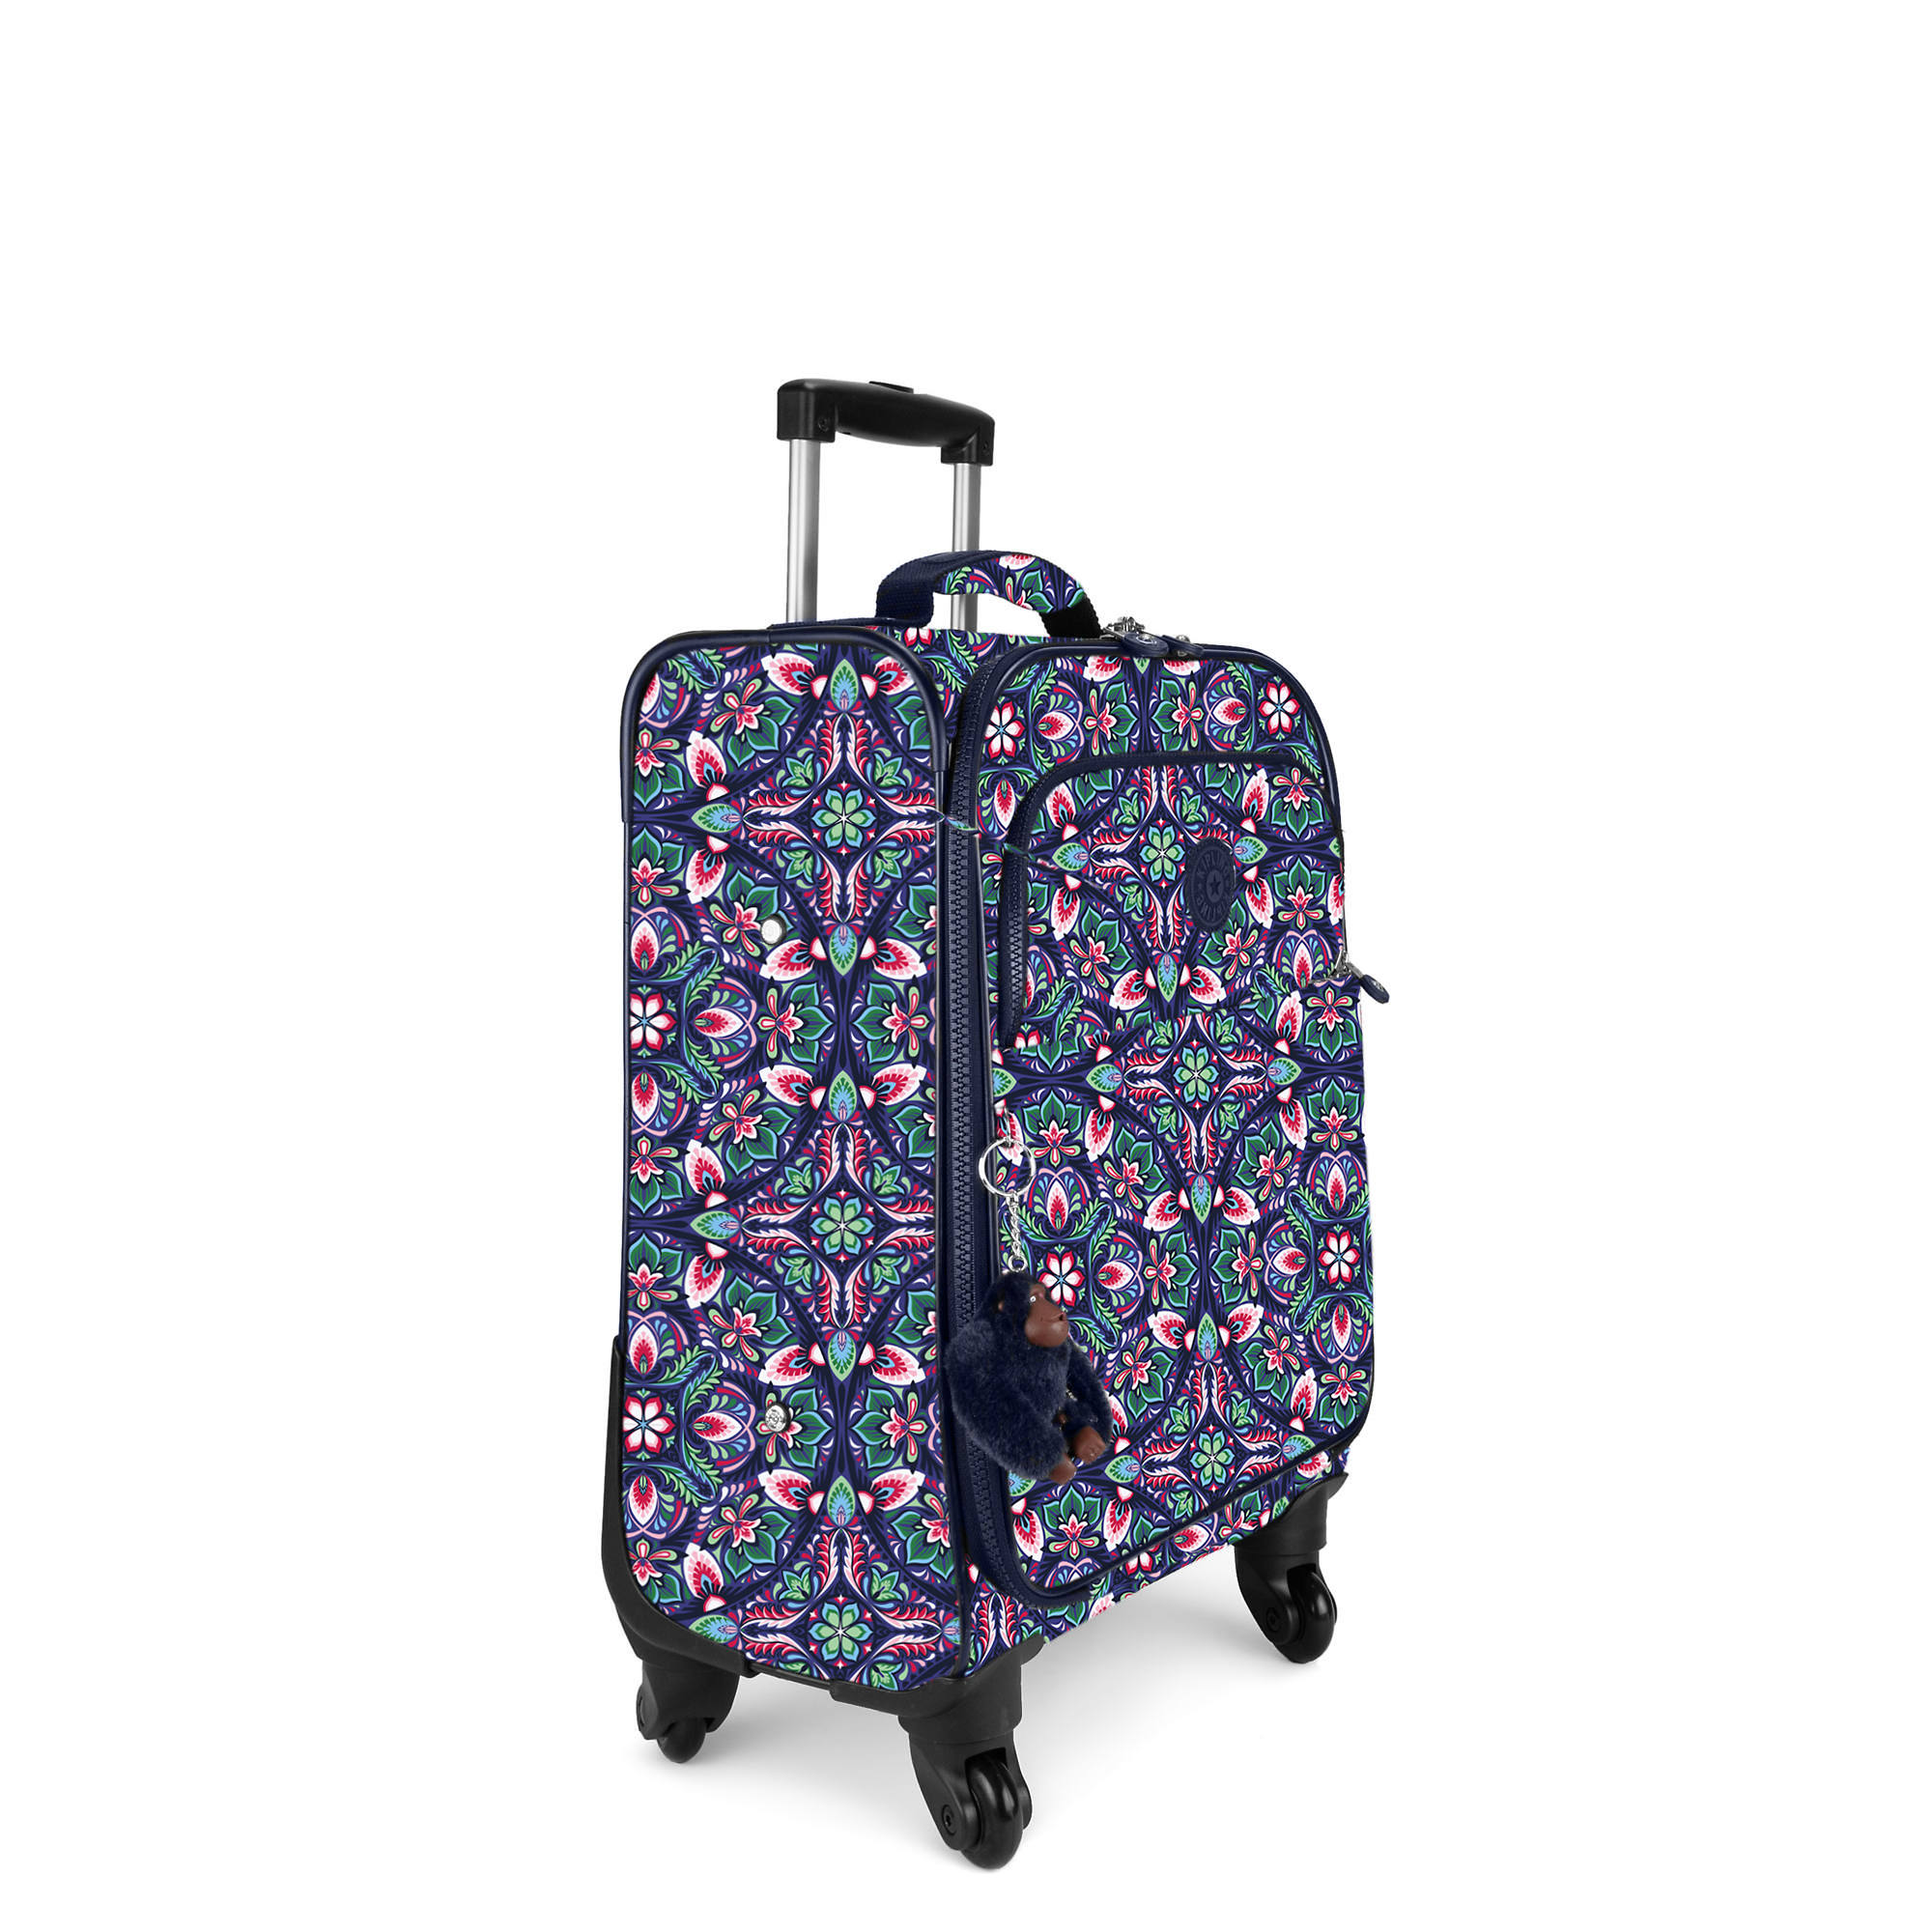 Kipling Parker Small Printed Wheeled Carry-On Luggage | eBay